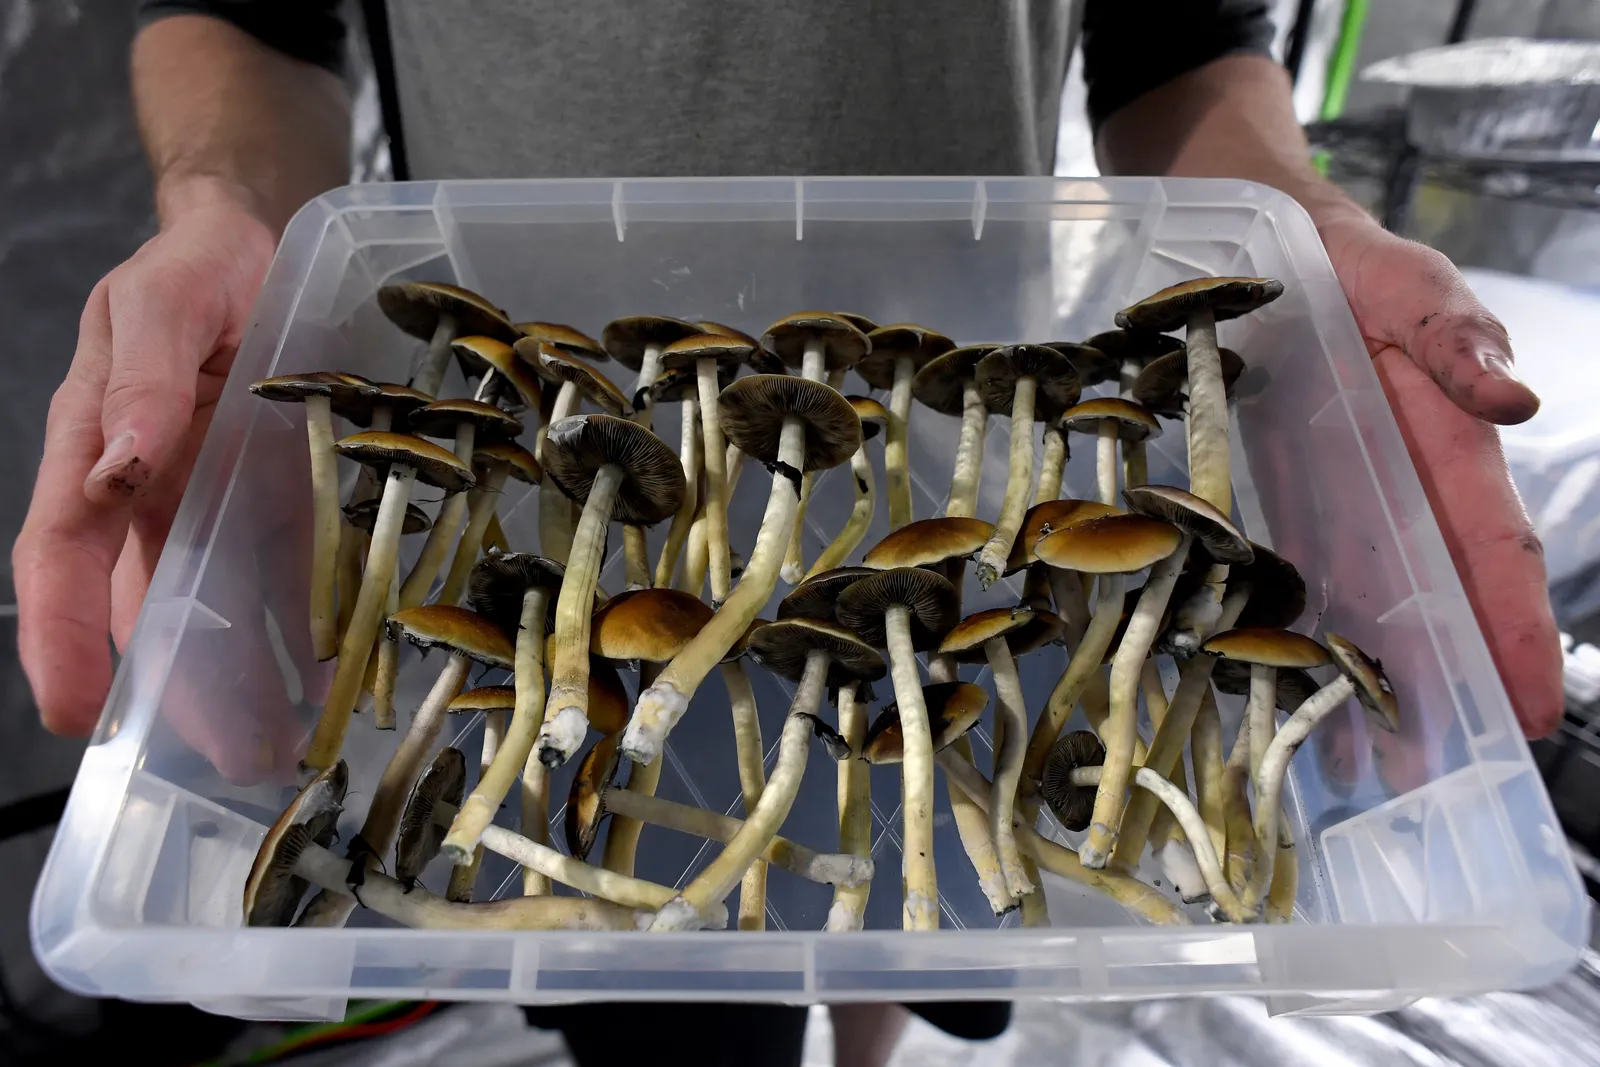 How Does Psilocybin Therapy Work?